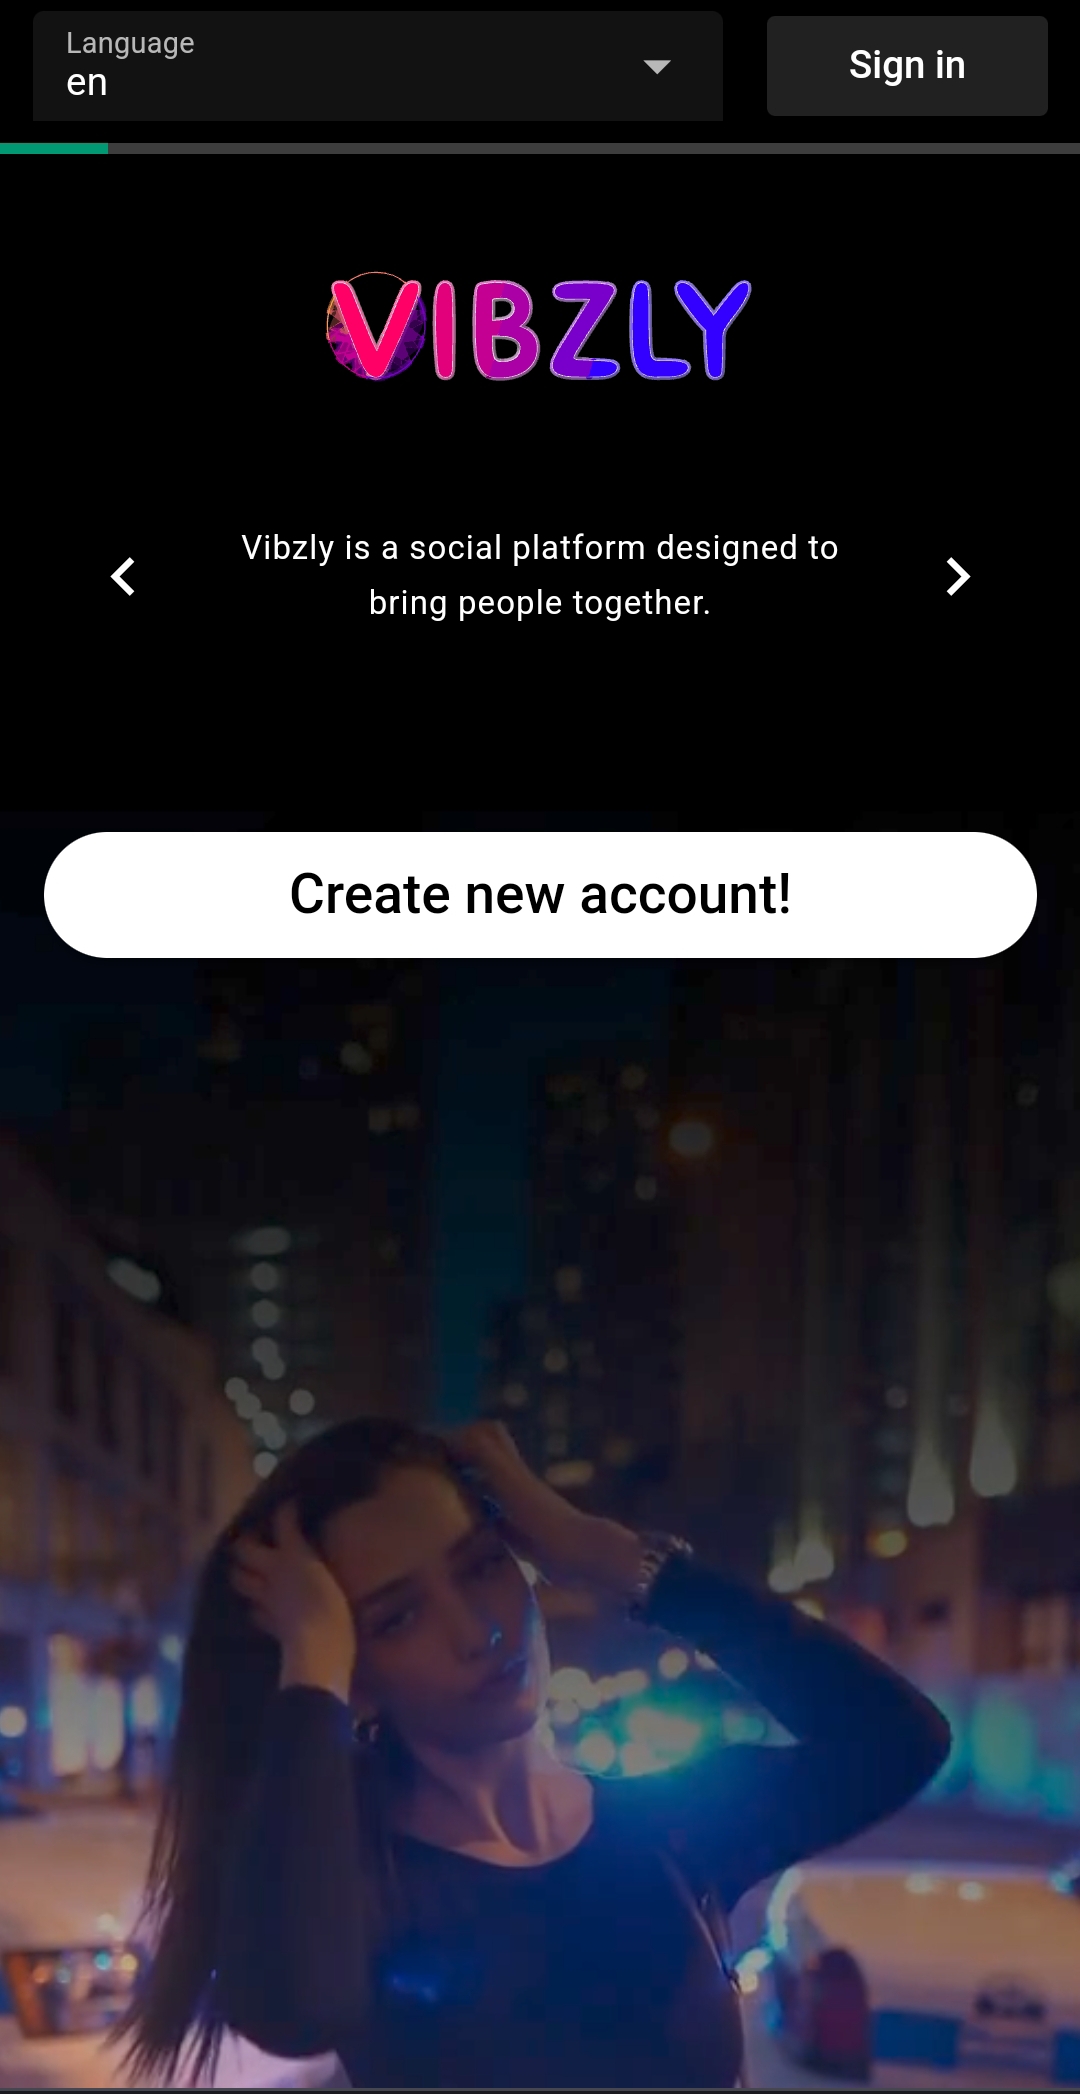 Vibzly